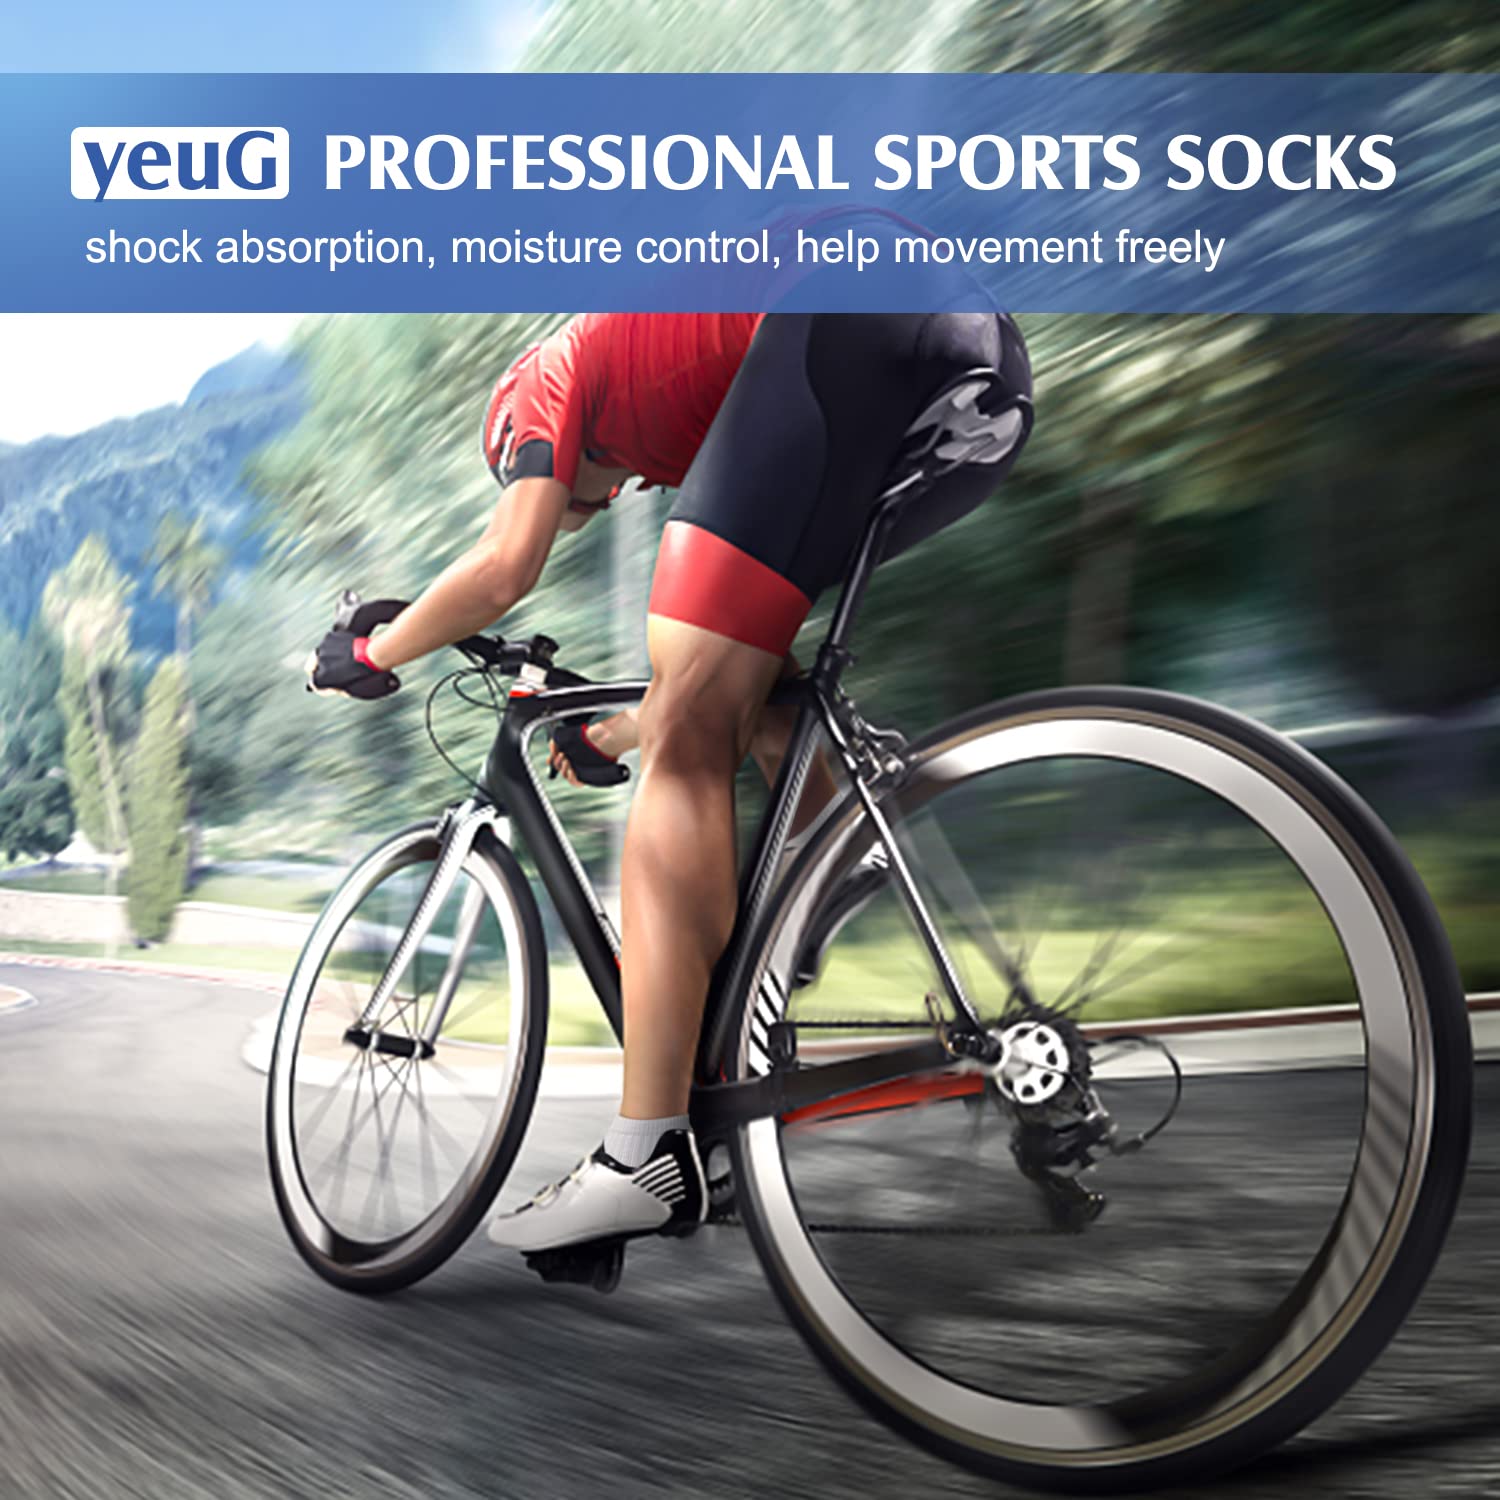 yeuG Copper Compression Socks for Men & Women Circulation- Arch Ankle Support for Athletic Running Medical Cycling（L/XL